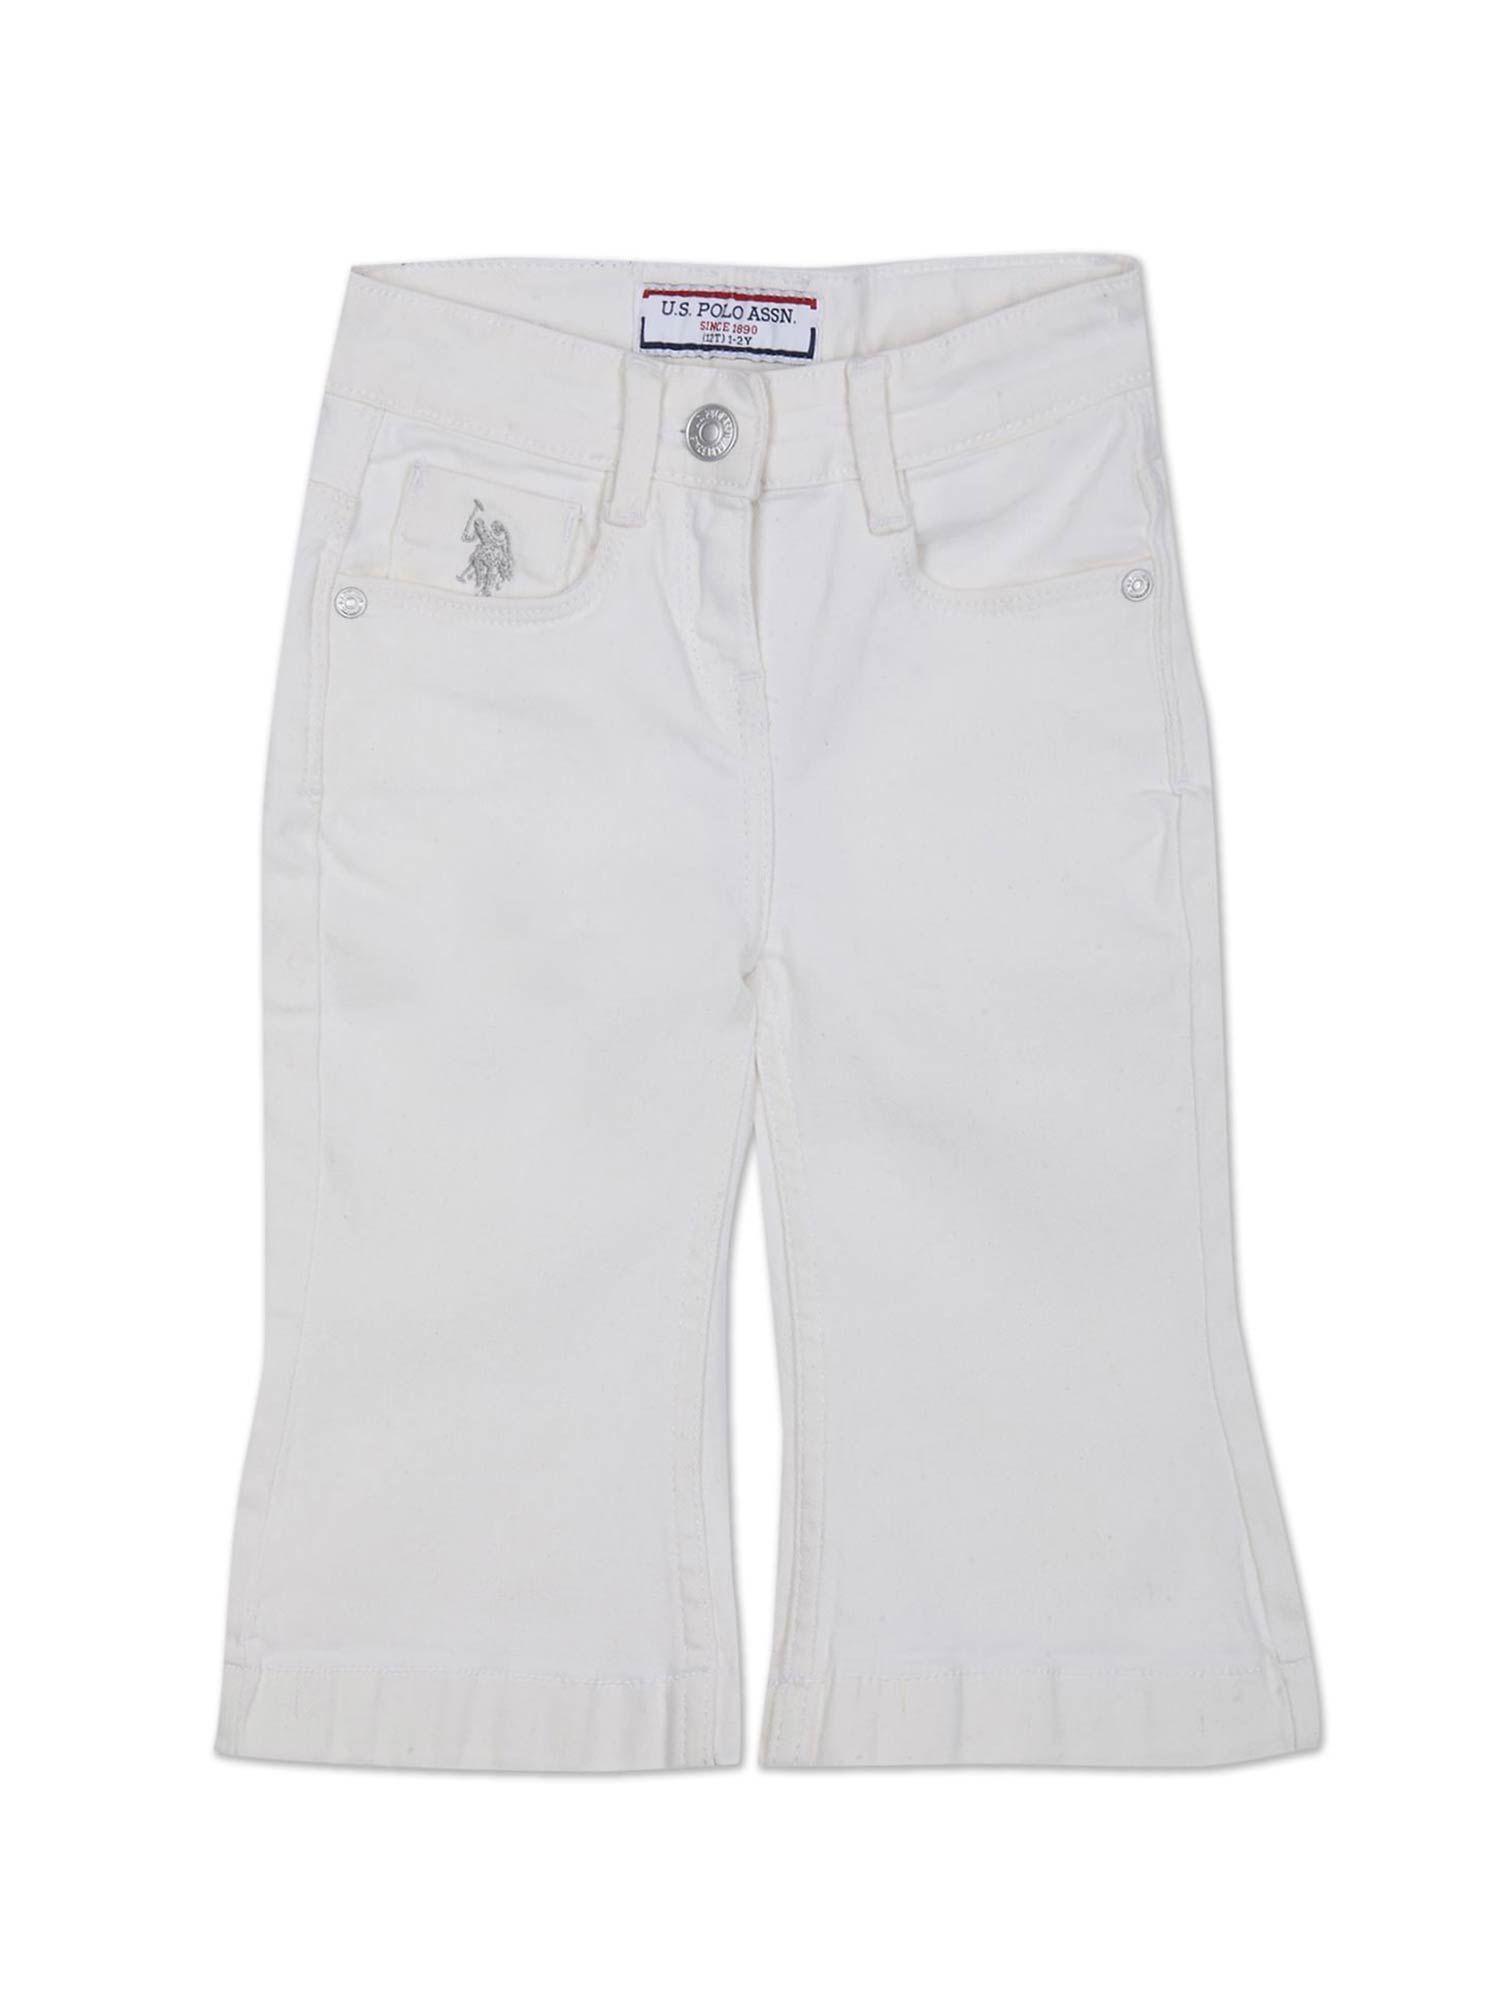 girls white mid rise bootcut style jeans